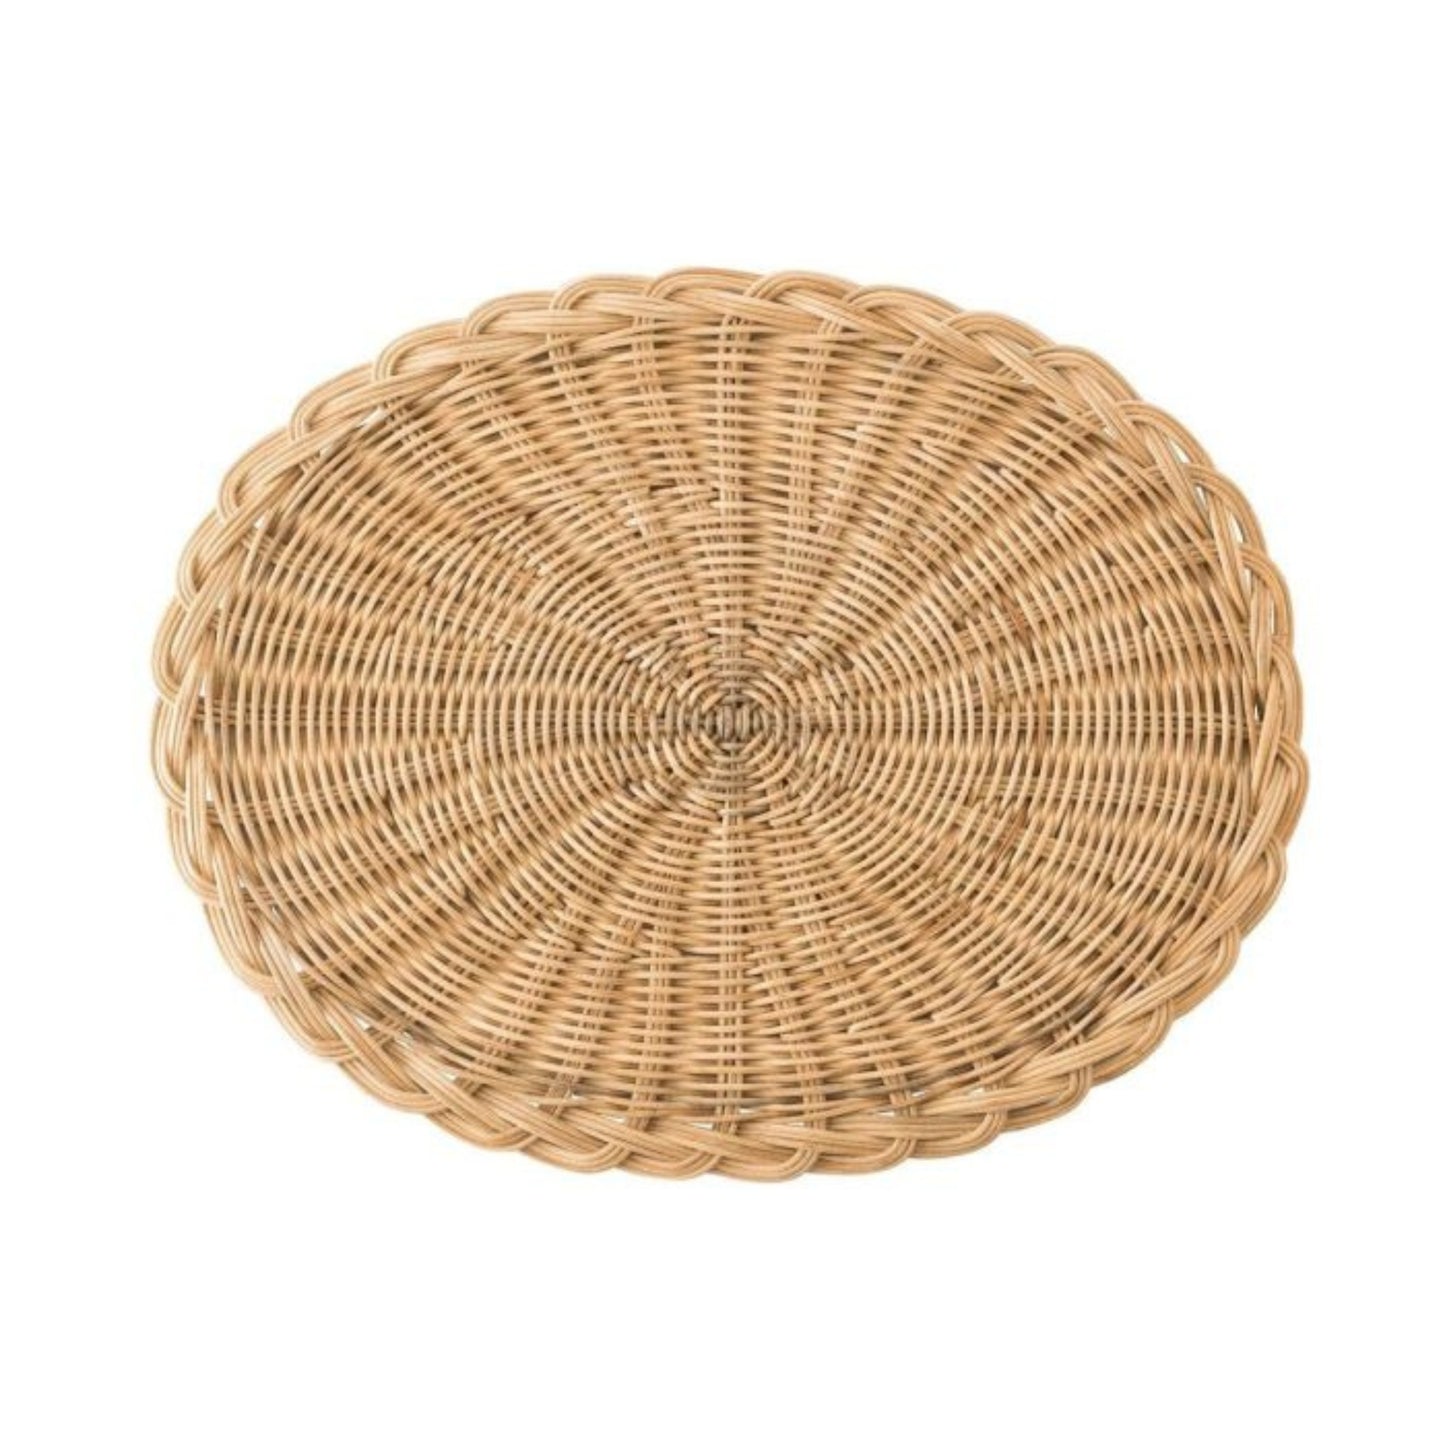 Braided Basket Oval Natural Placemat - Set of 2